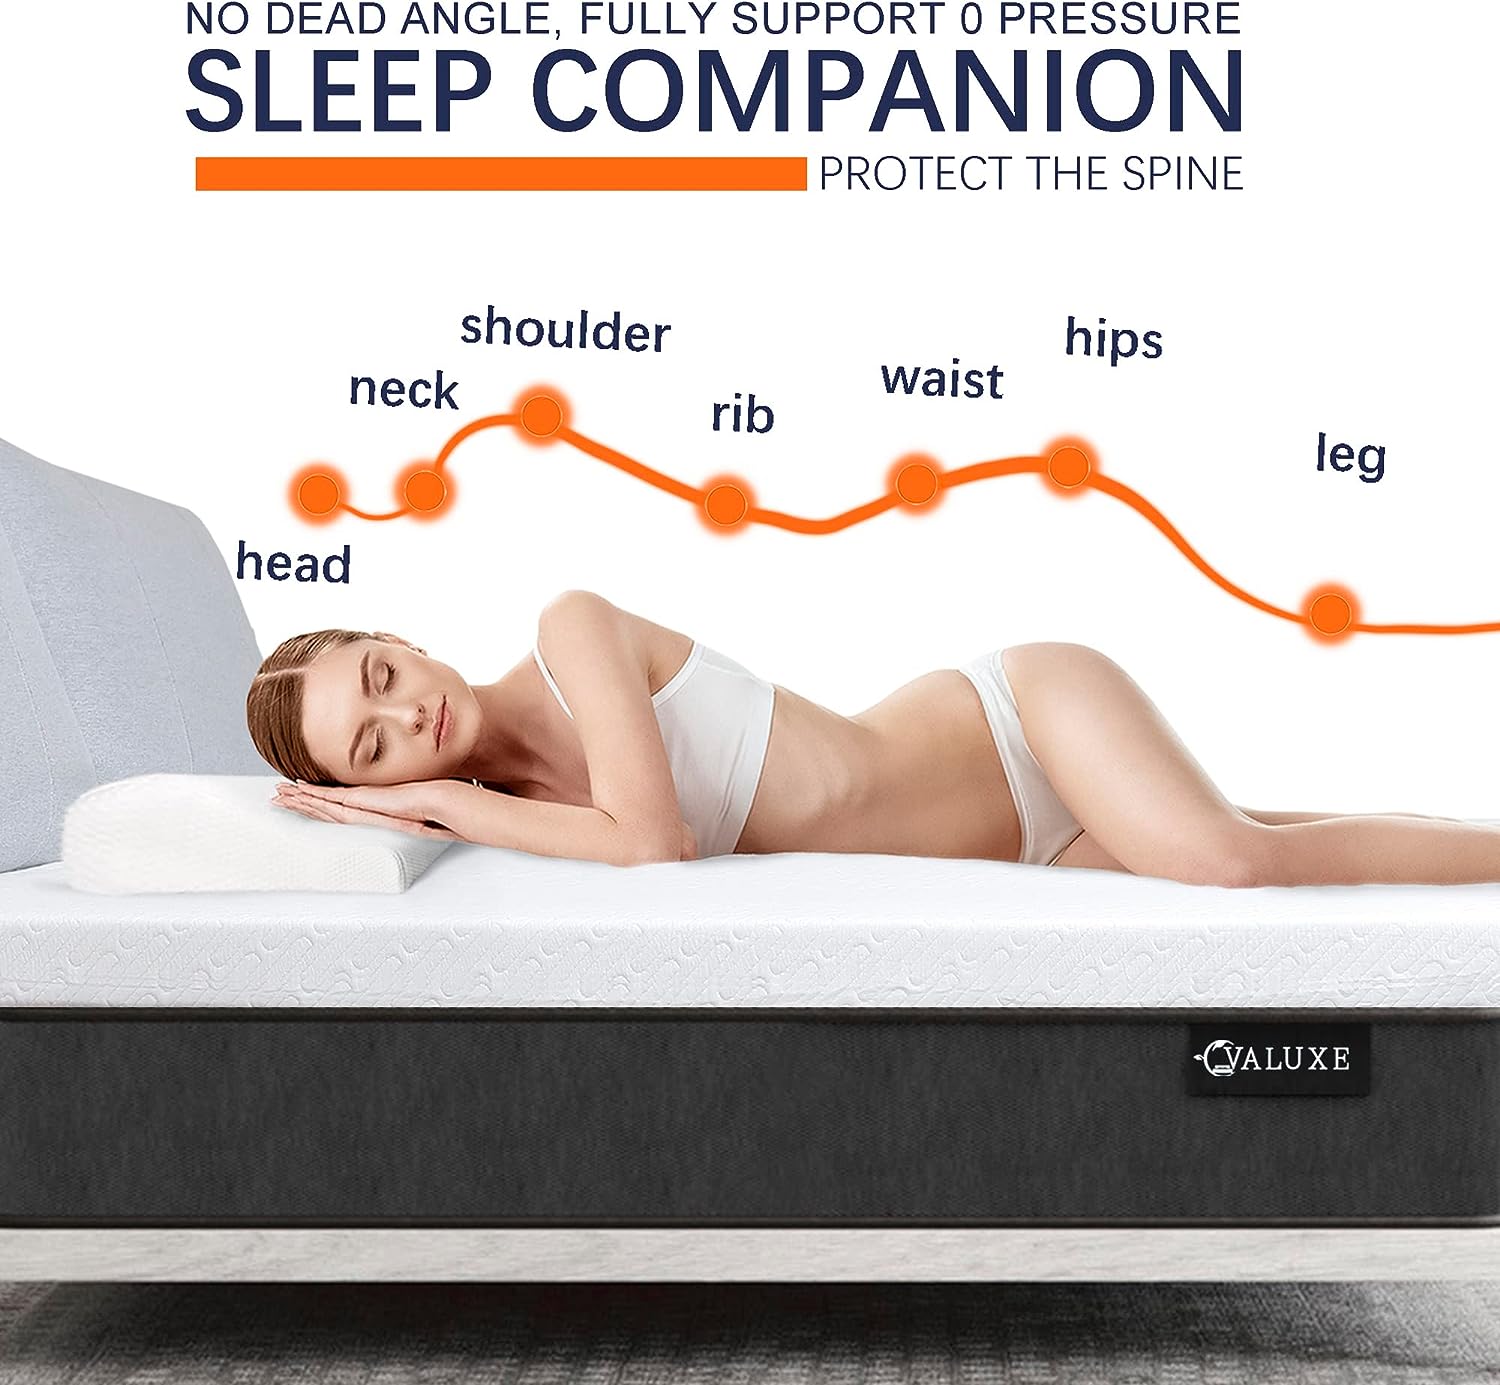 4 inch Non-Slip Design Gel Memory Foam Mattress Topper with Removable &  Washable Cover for Cooling Sleep,Pressure Relief ,CertiPUR-US Certified -  Full